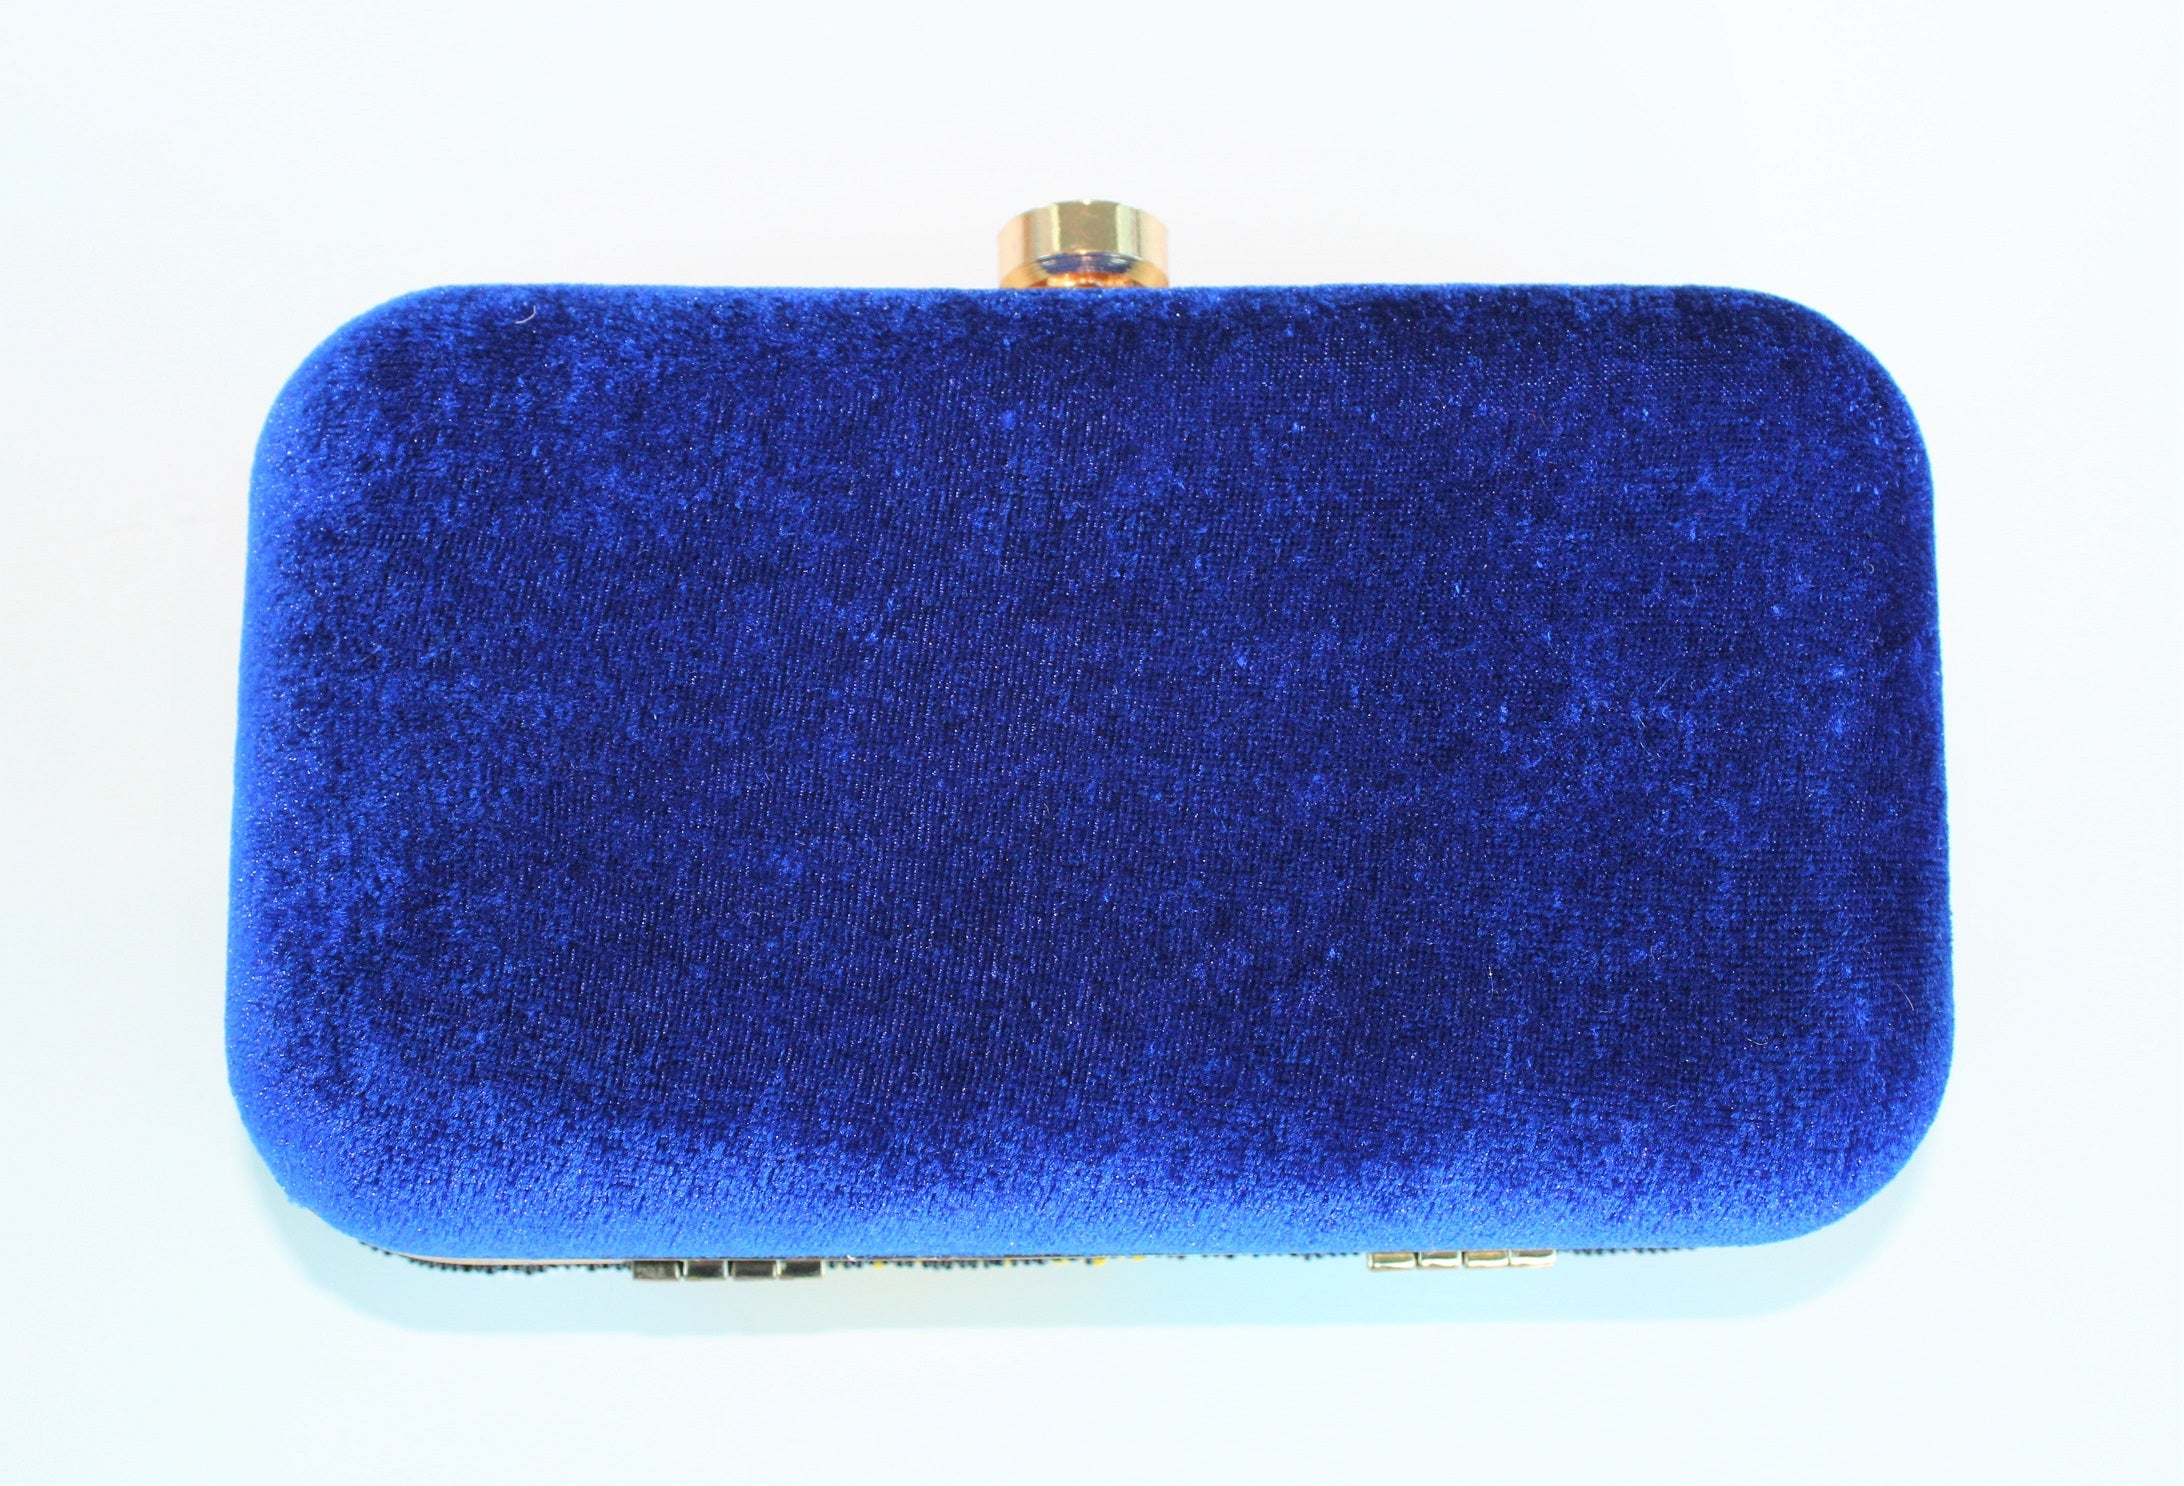 The Femme Clutch